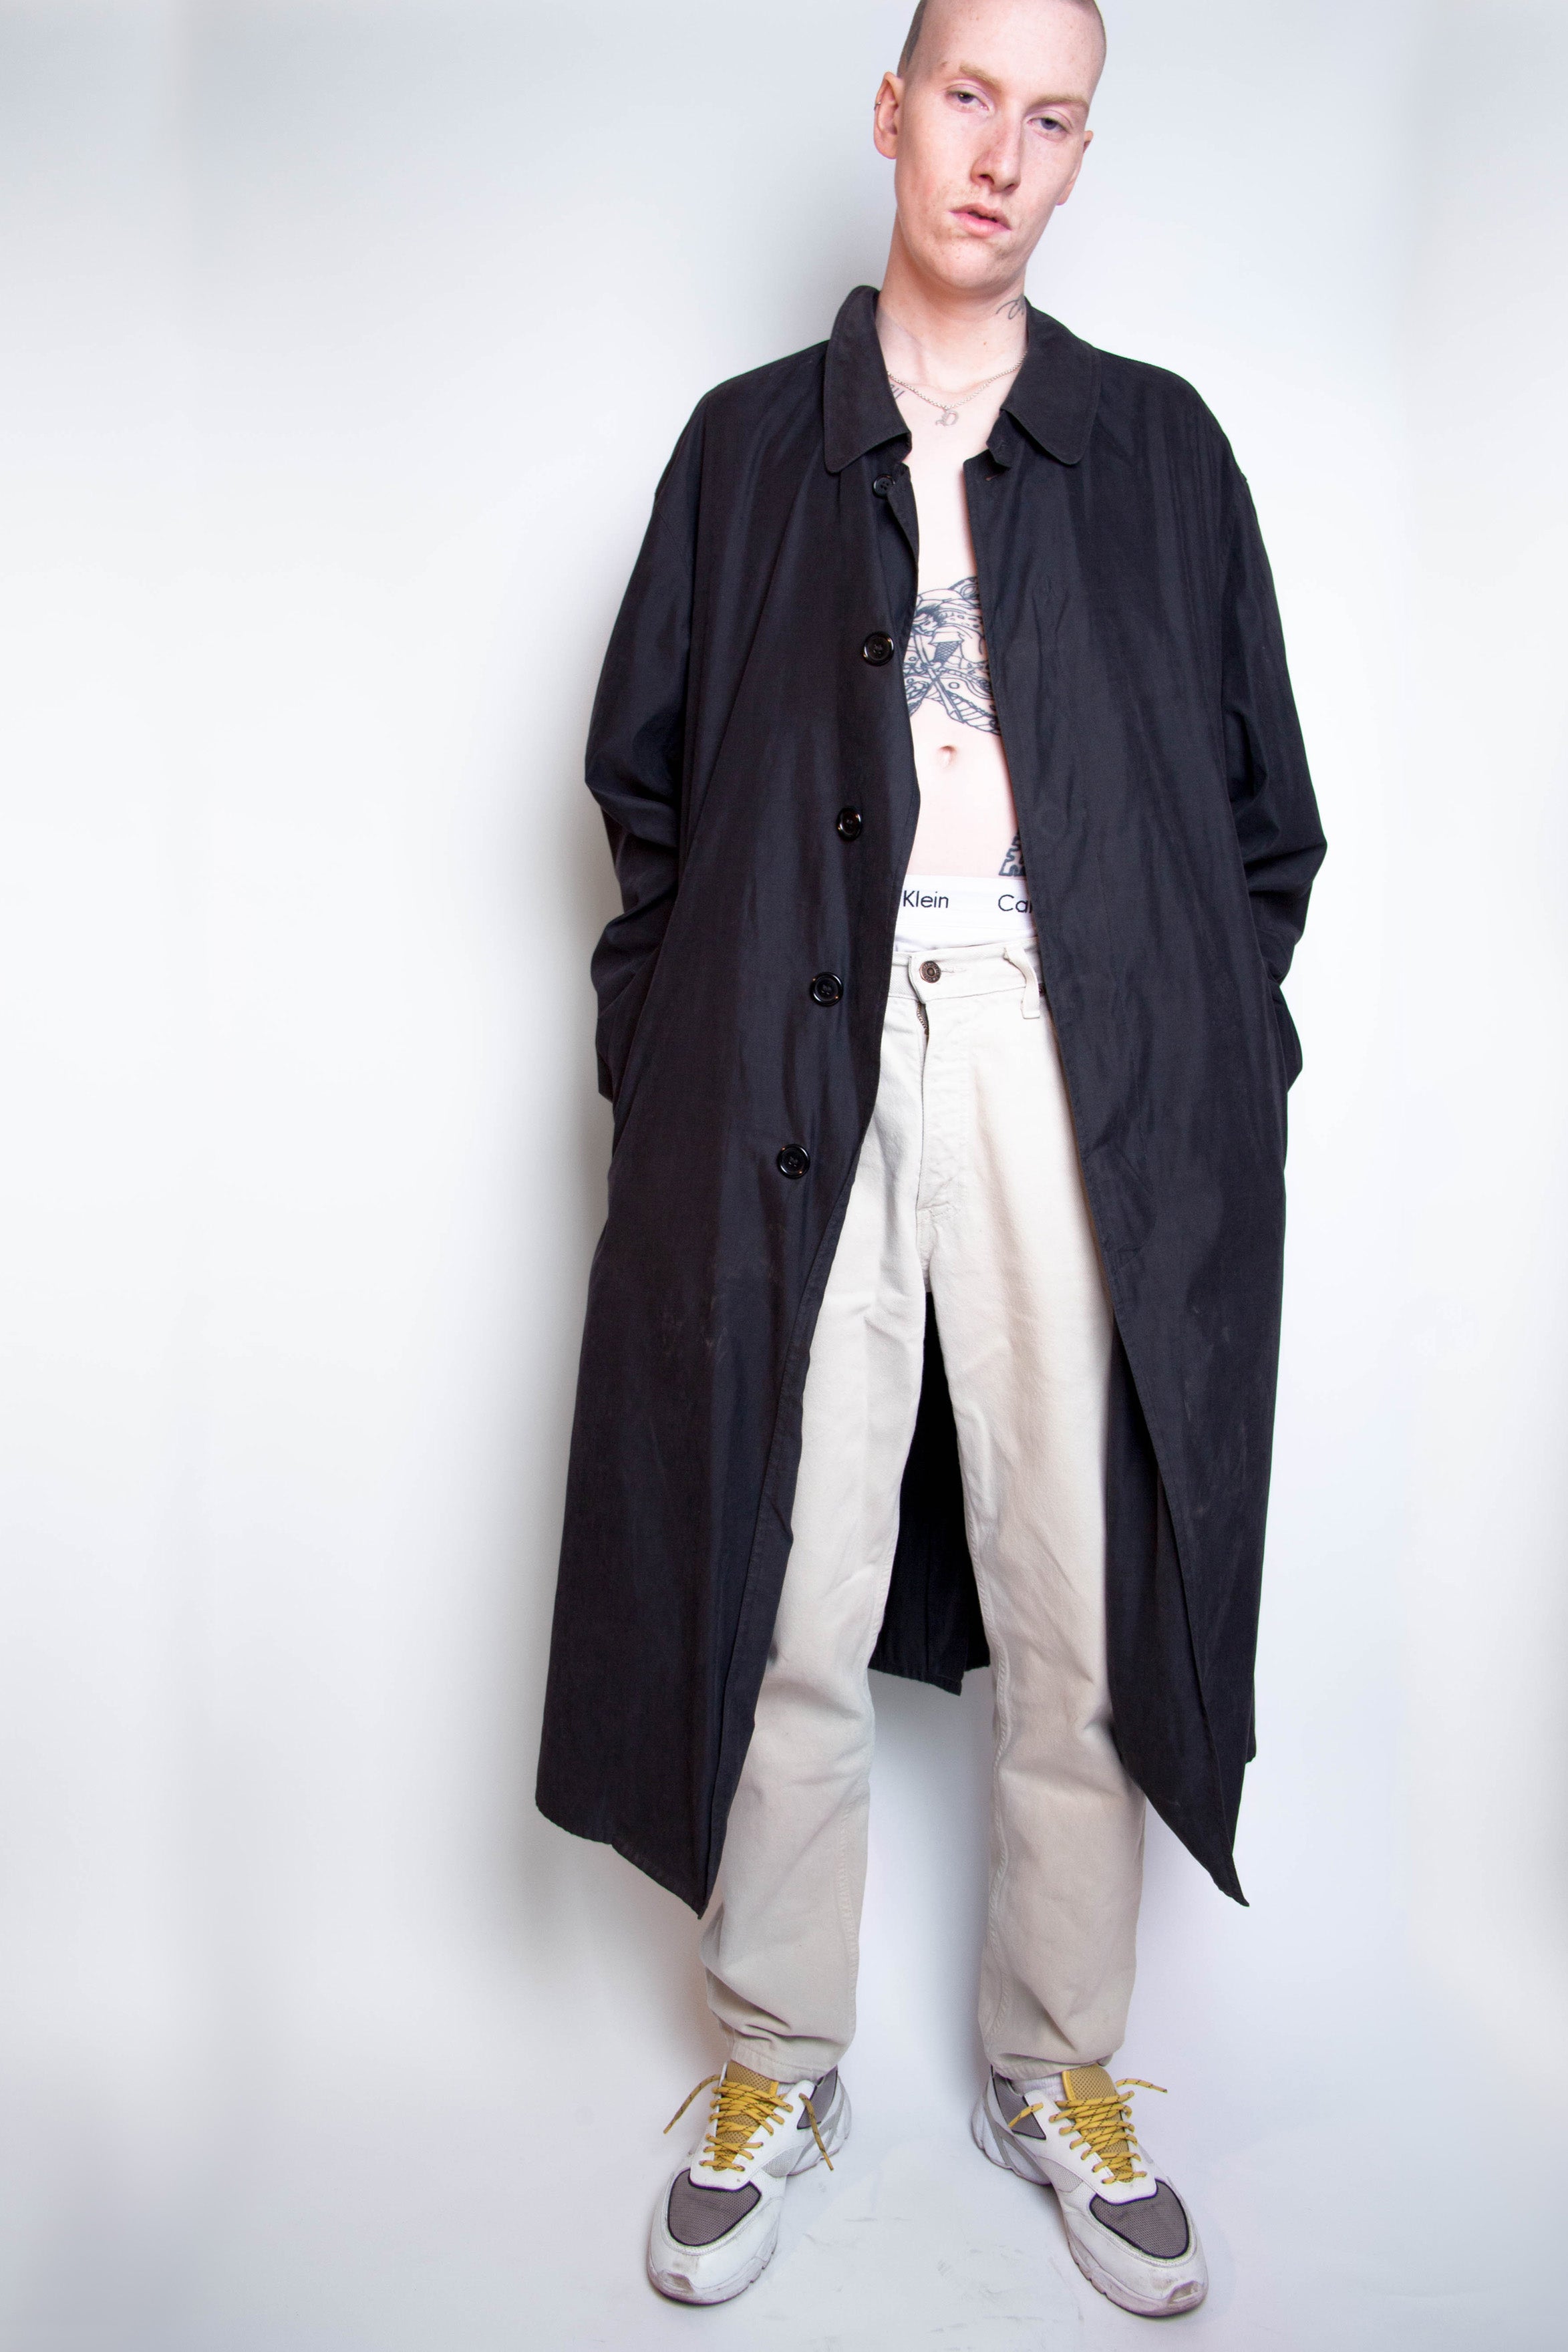 Vintage 80s Burberry Trench Coat – Not Too Sweet